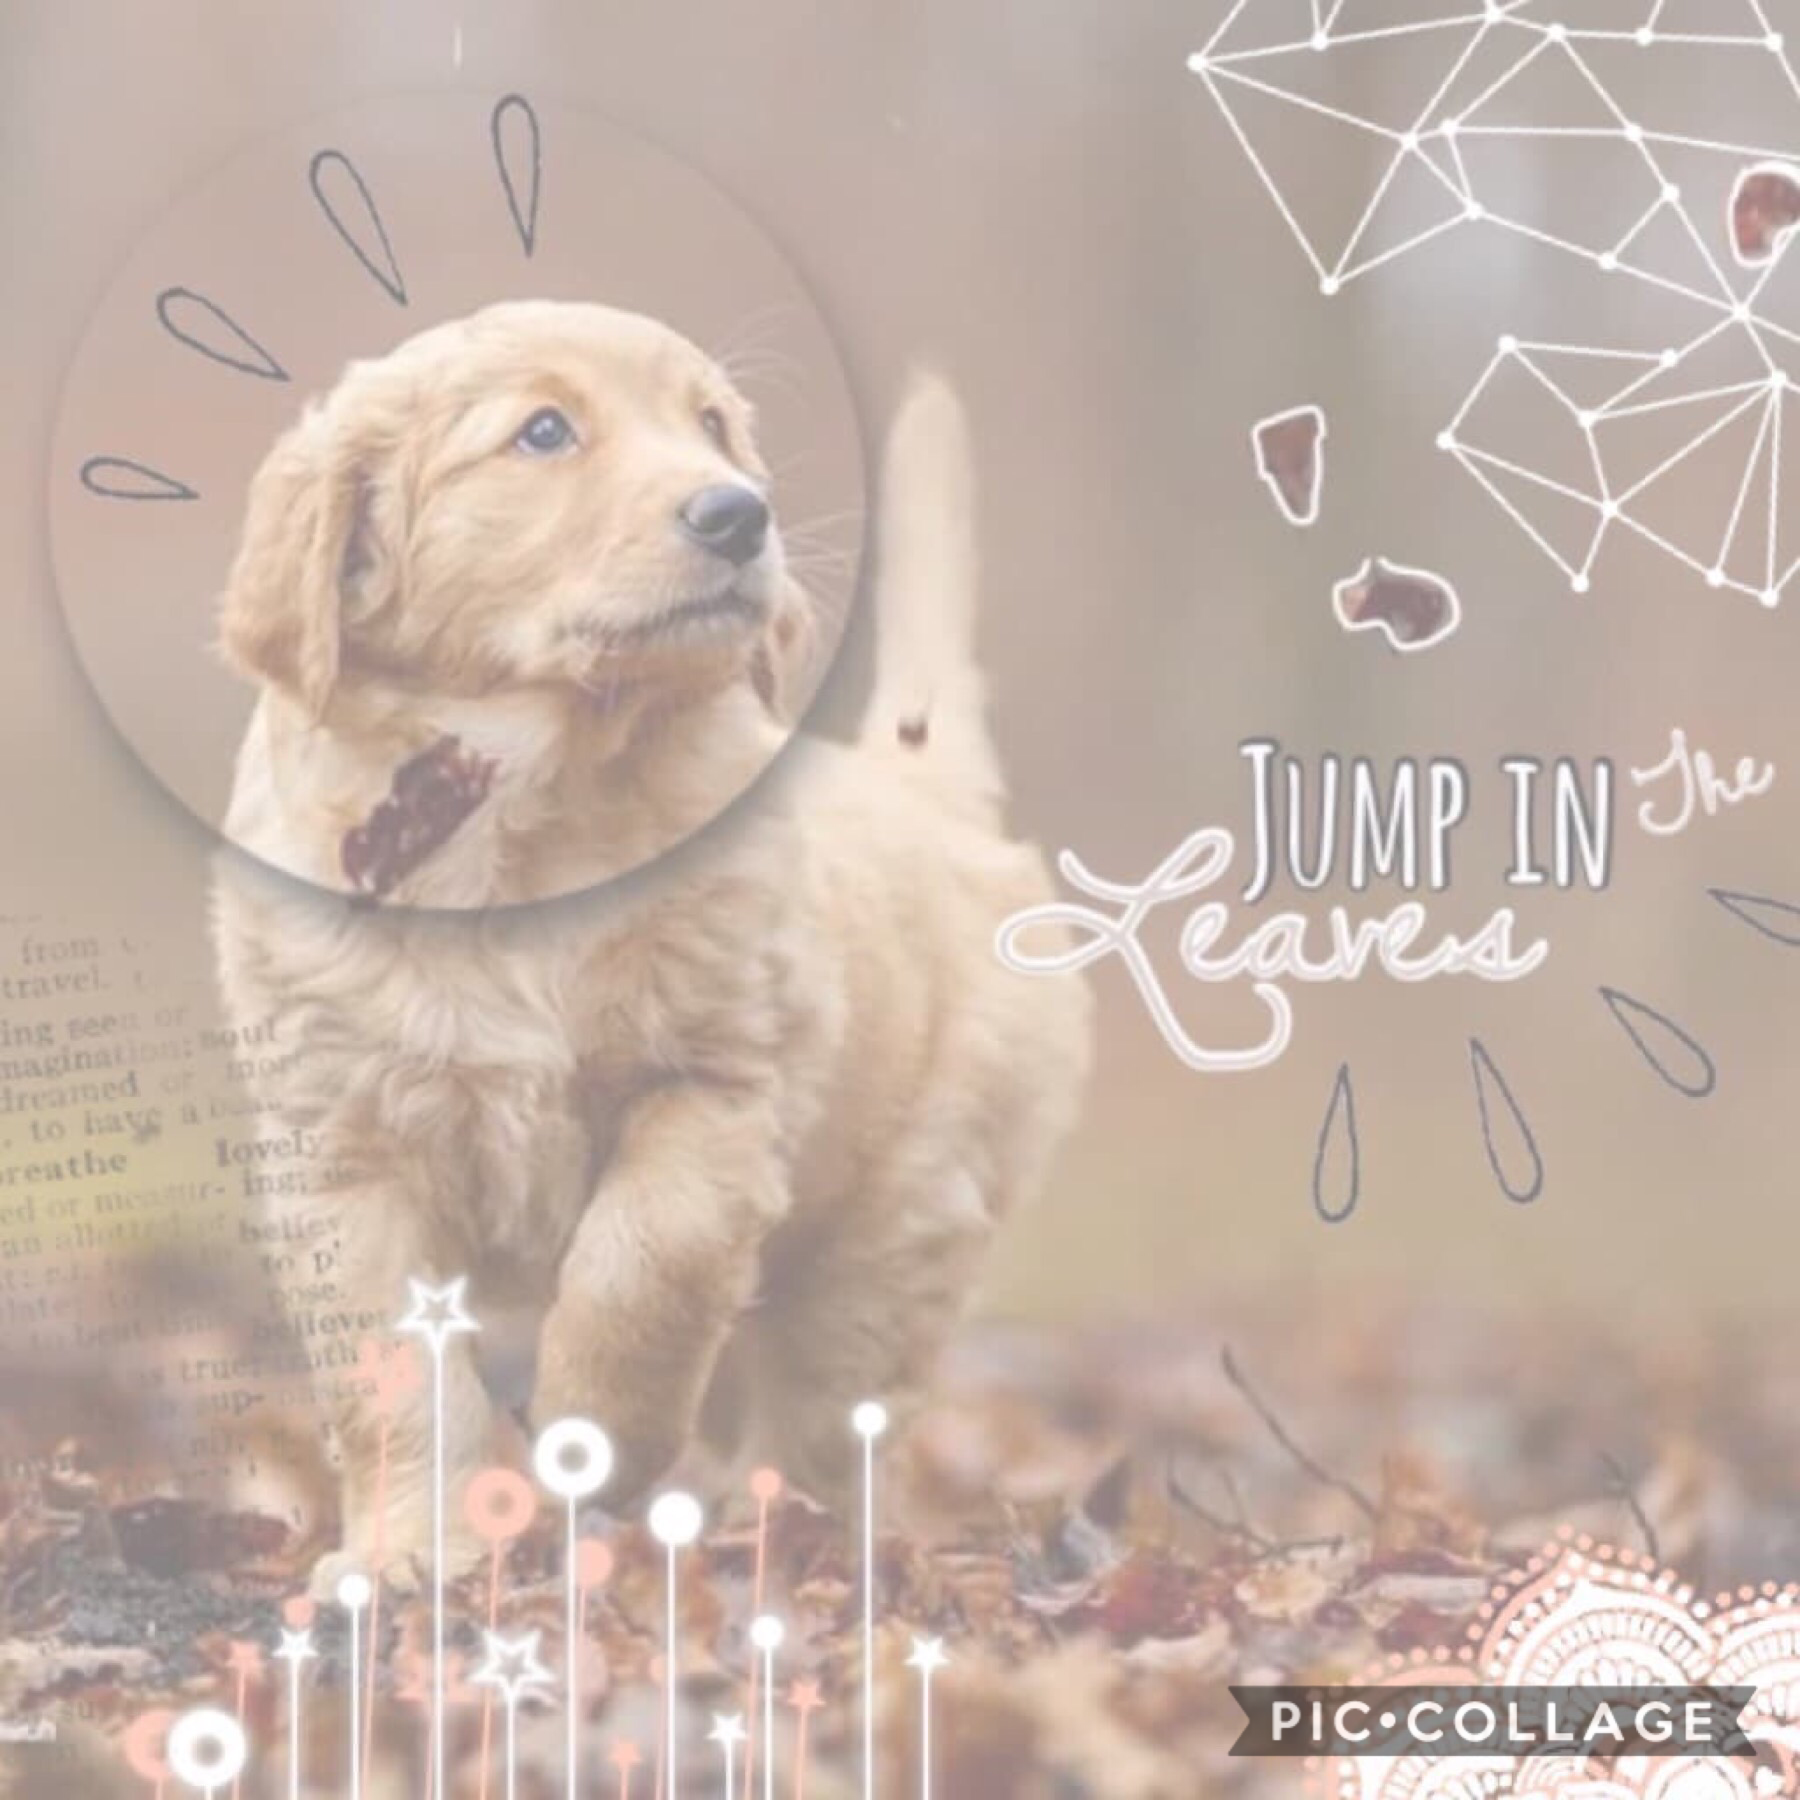 🍂tap🍂
Collab with the wonderful DogandAvengerLover !
GO FOLLOW THEM THIS INSTANT!
🍂Ly!
